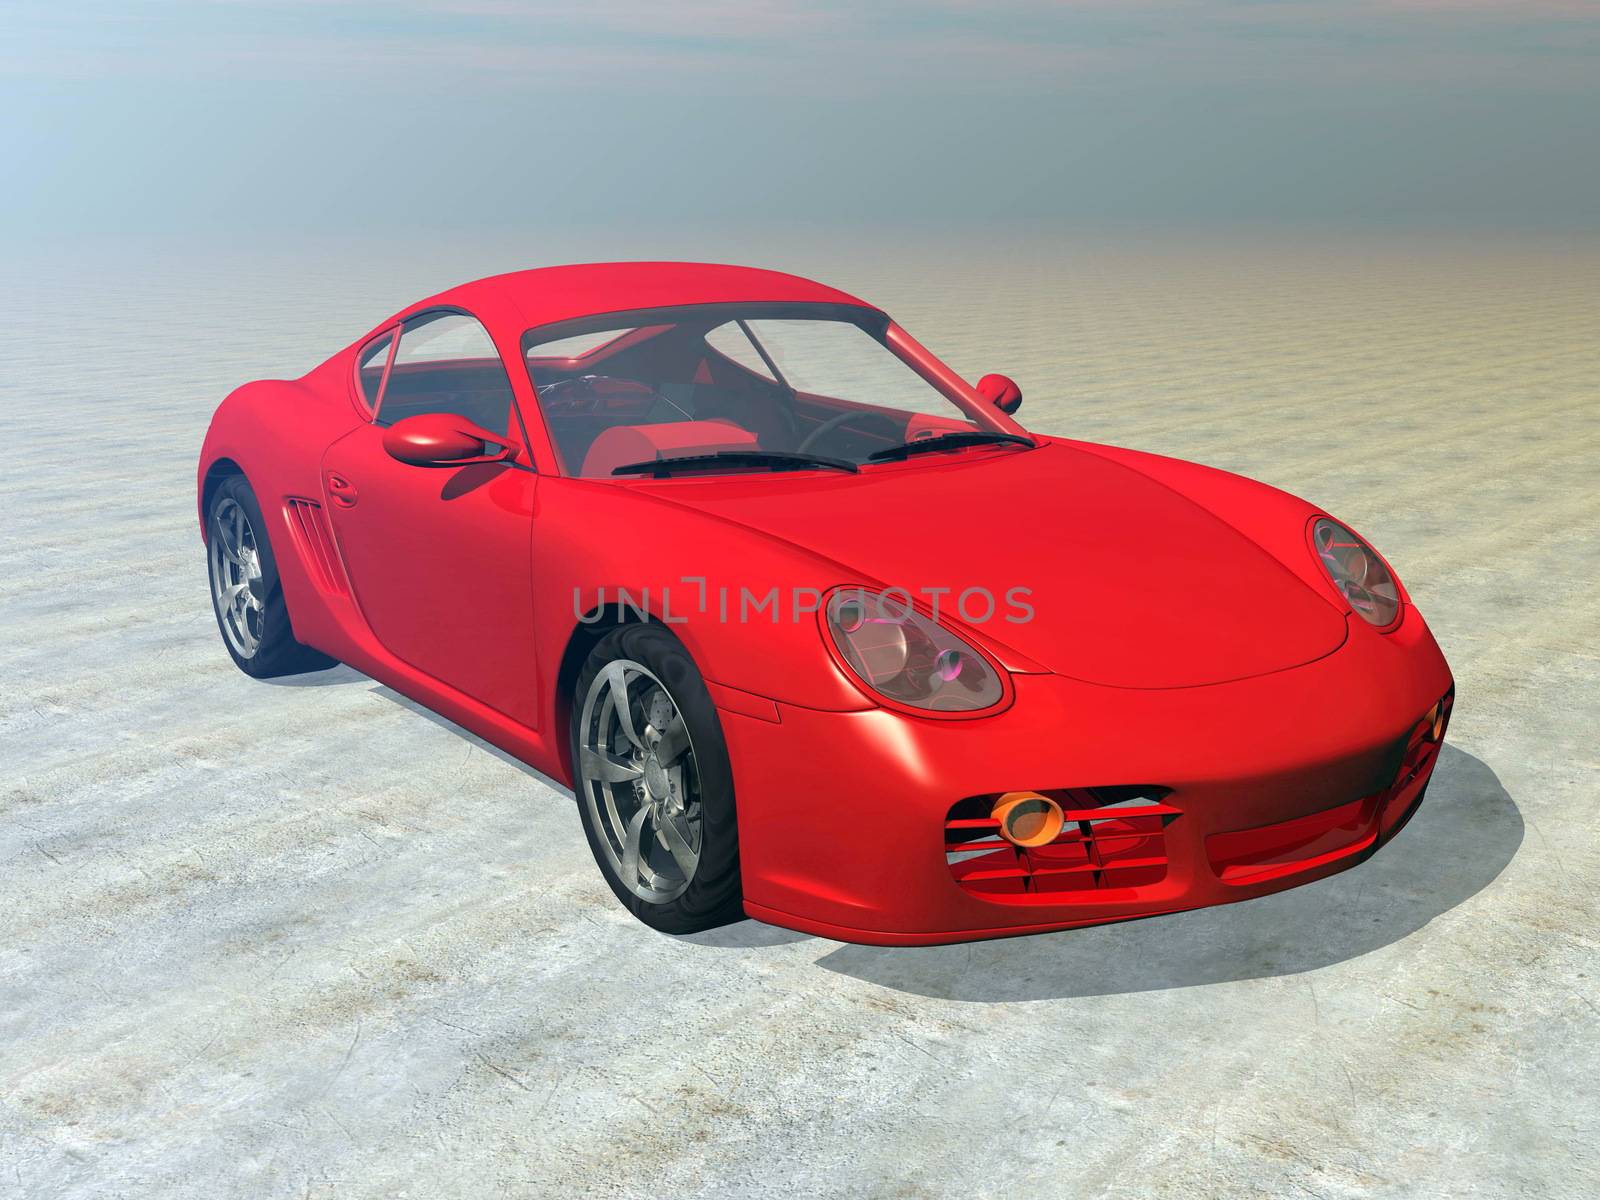 One red sportscar outdoor by morning light